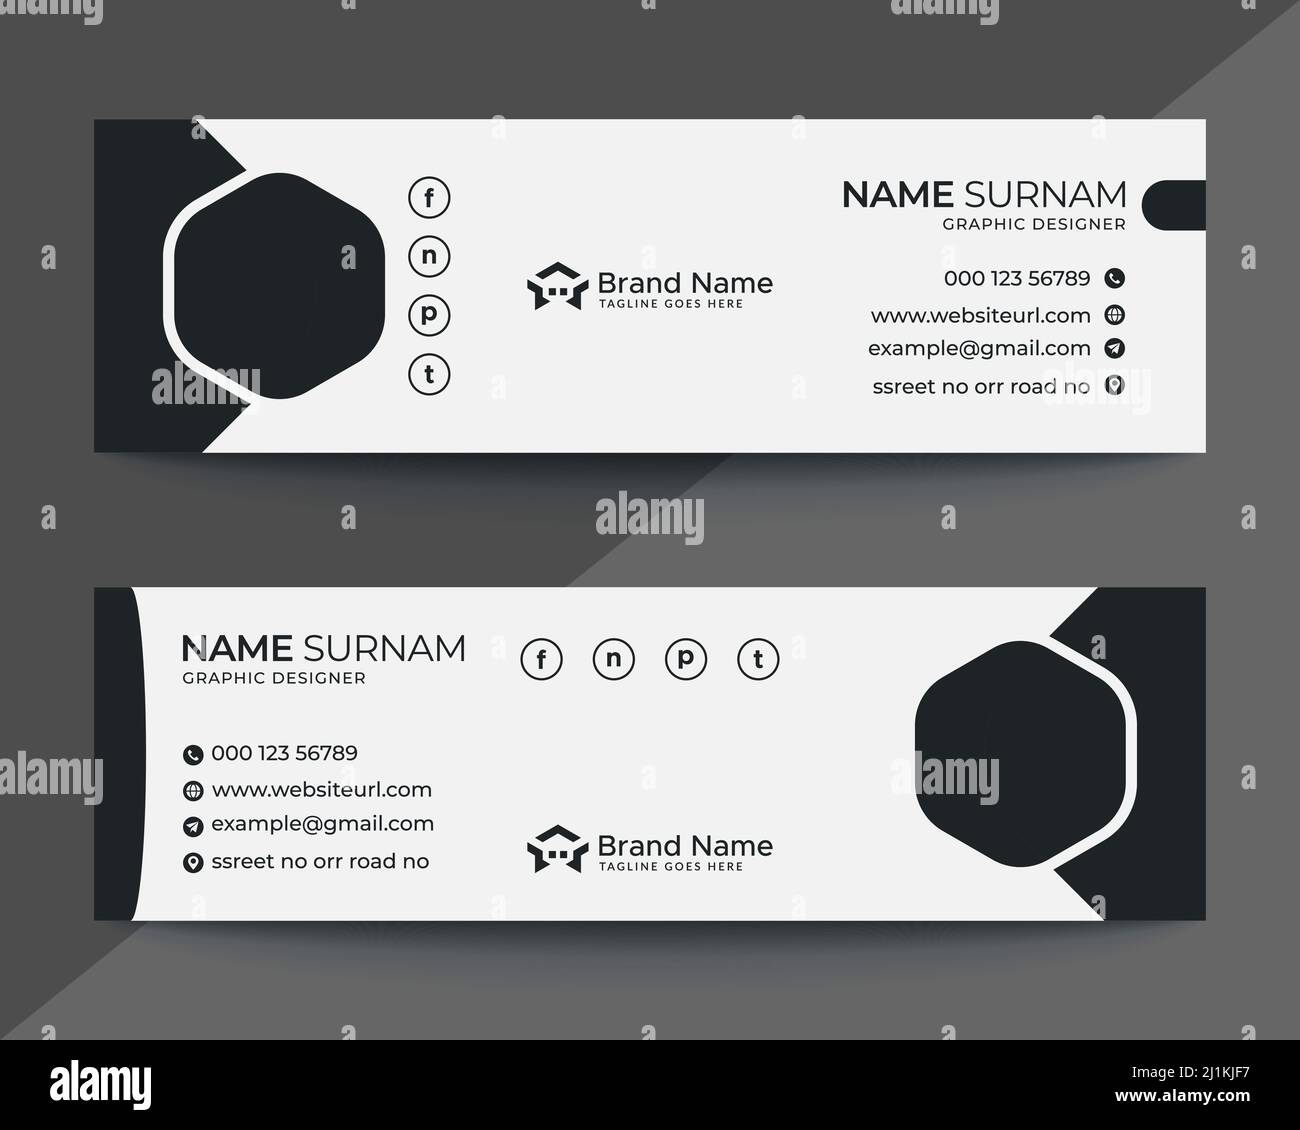 Corporate, Modern and Professional Email Signature. Email footer. Personal social media cover design. Vectors Illustrations. black and white Stock Vector